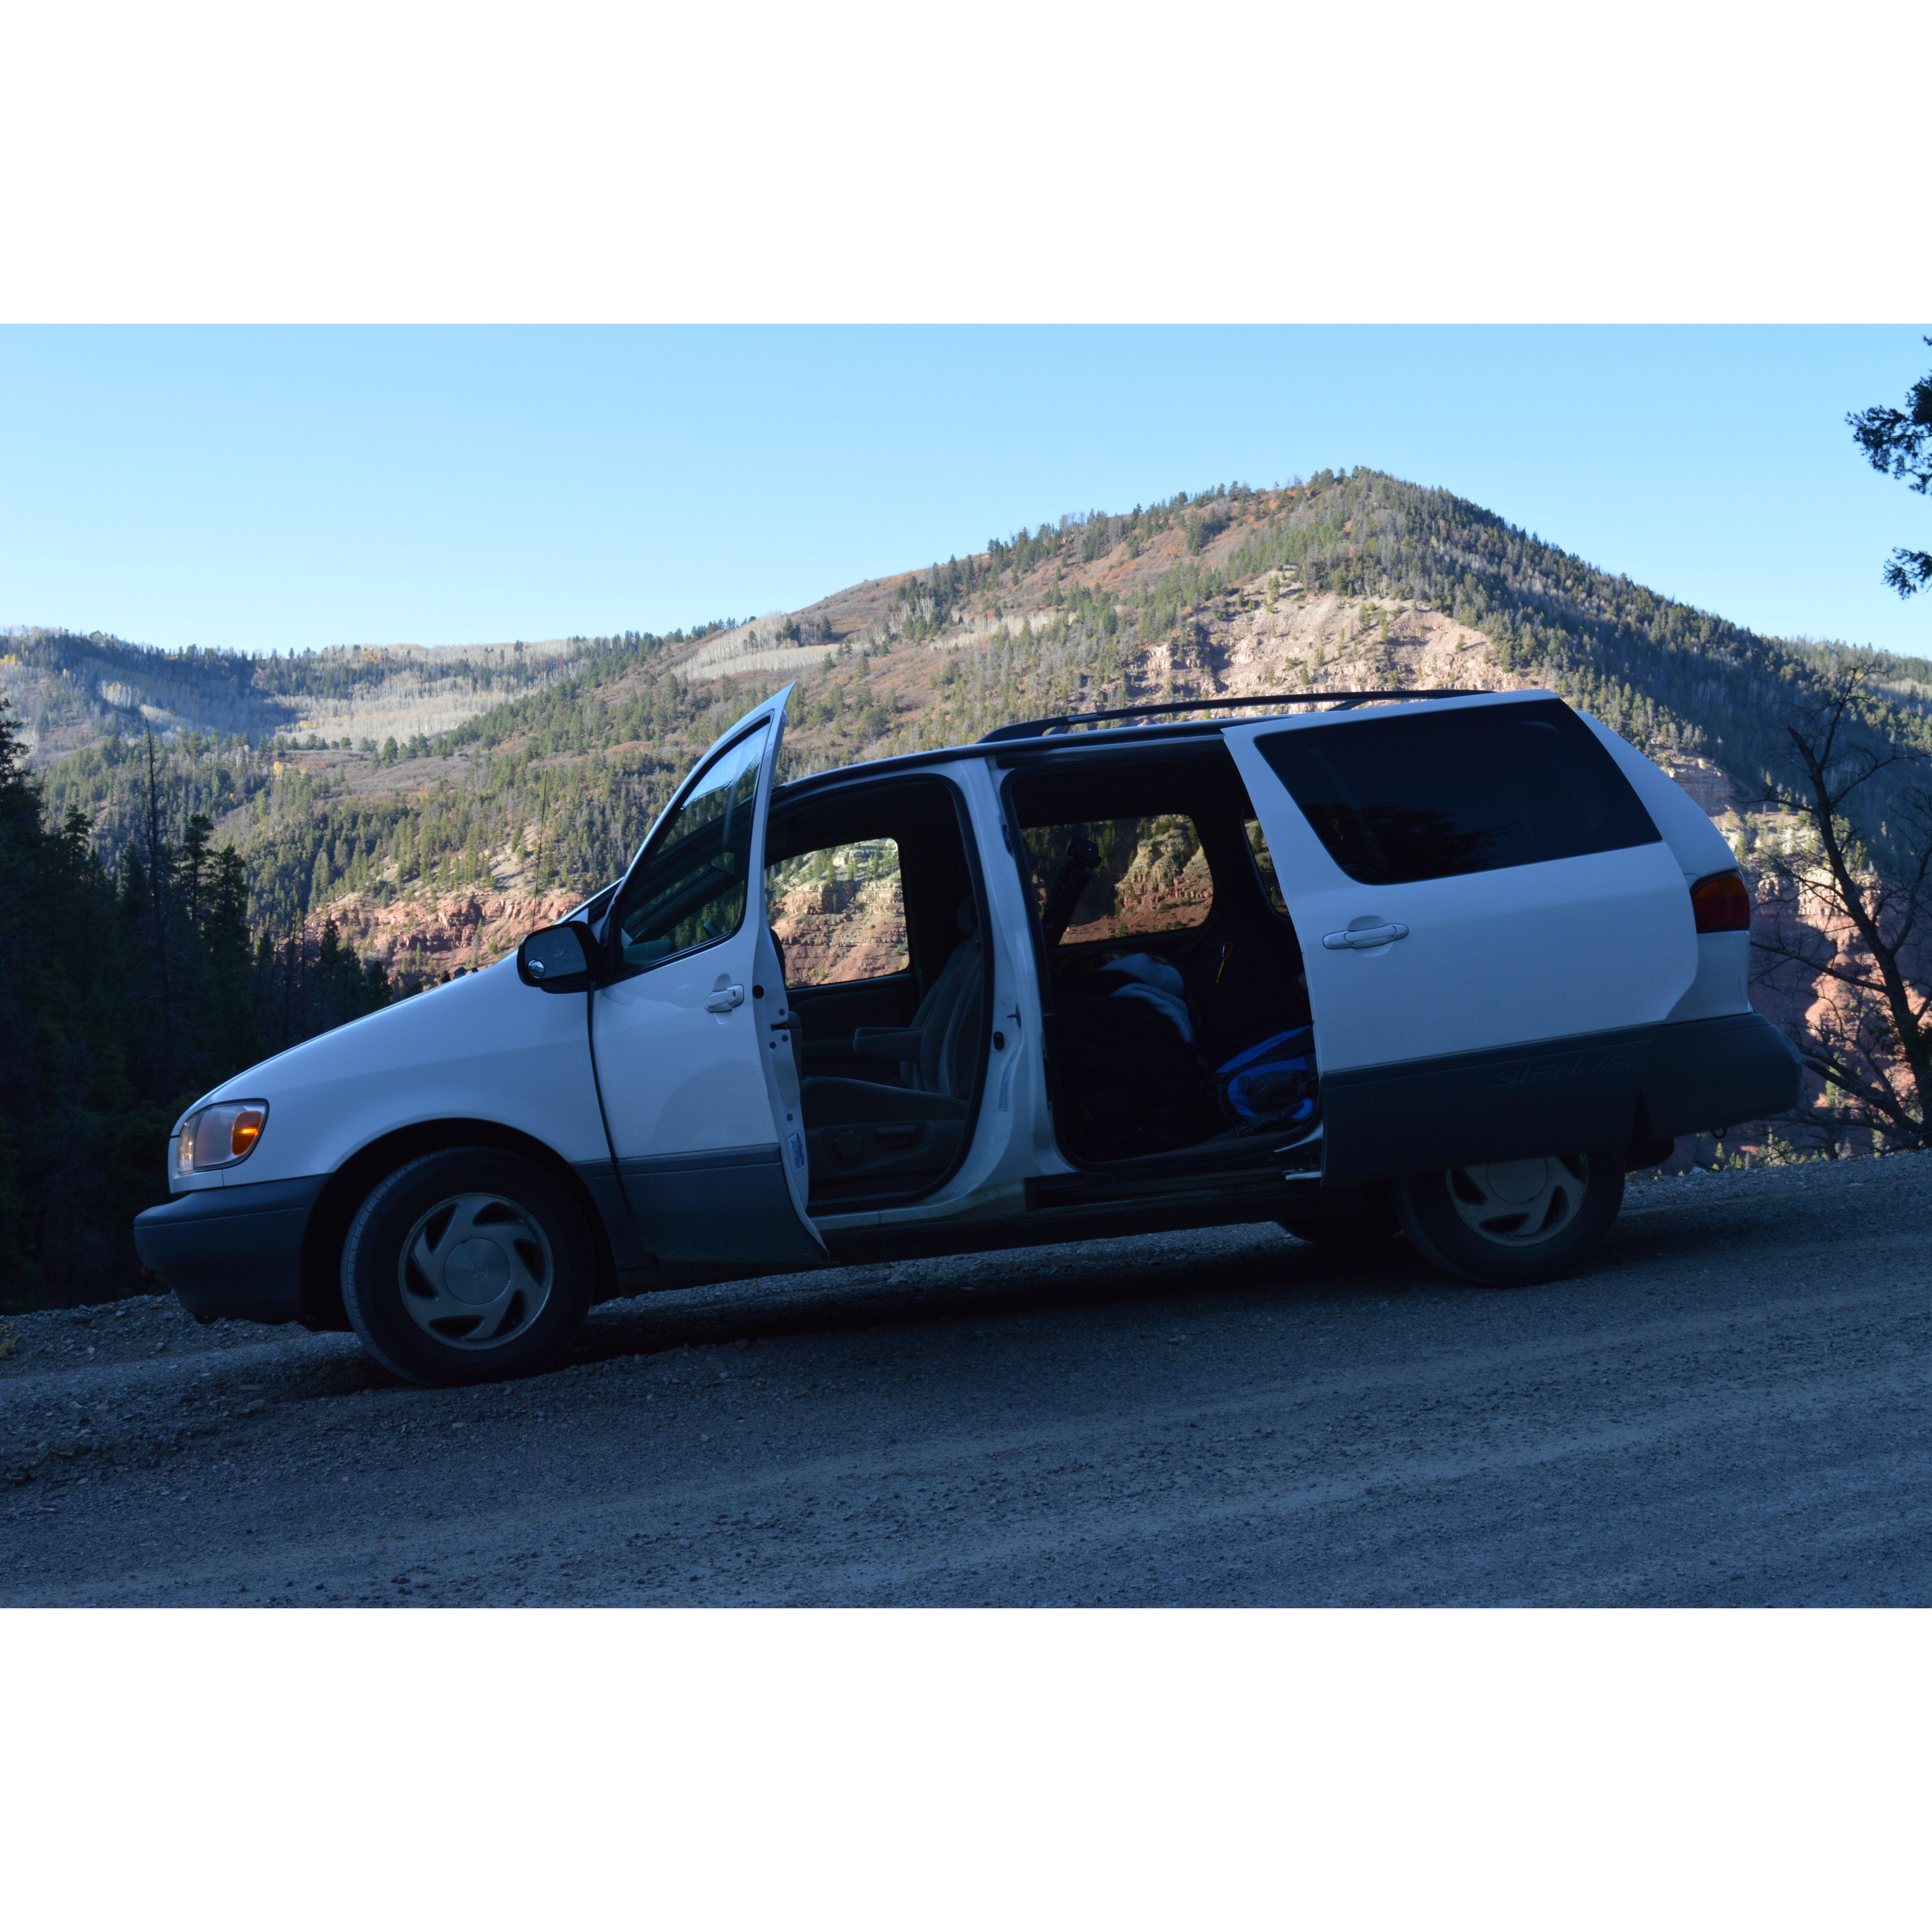 This toyota sienna saw MN, CO, WY, SD, ND, MT, ID, OR, WA, CA, NM, NV, AZ, UT, WI, and more! We traveled around the US in this van and lived out of it for a full summer.